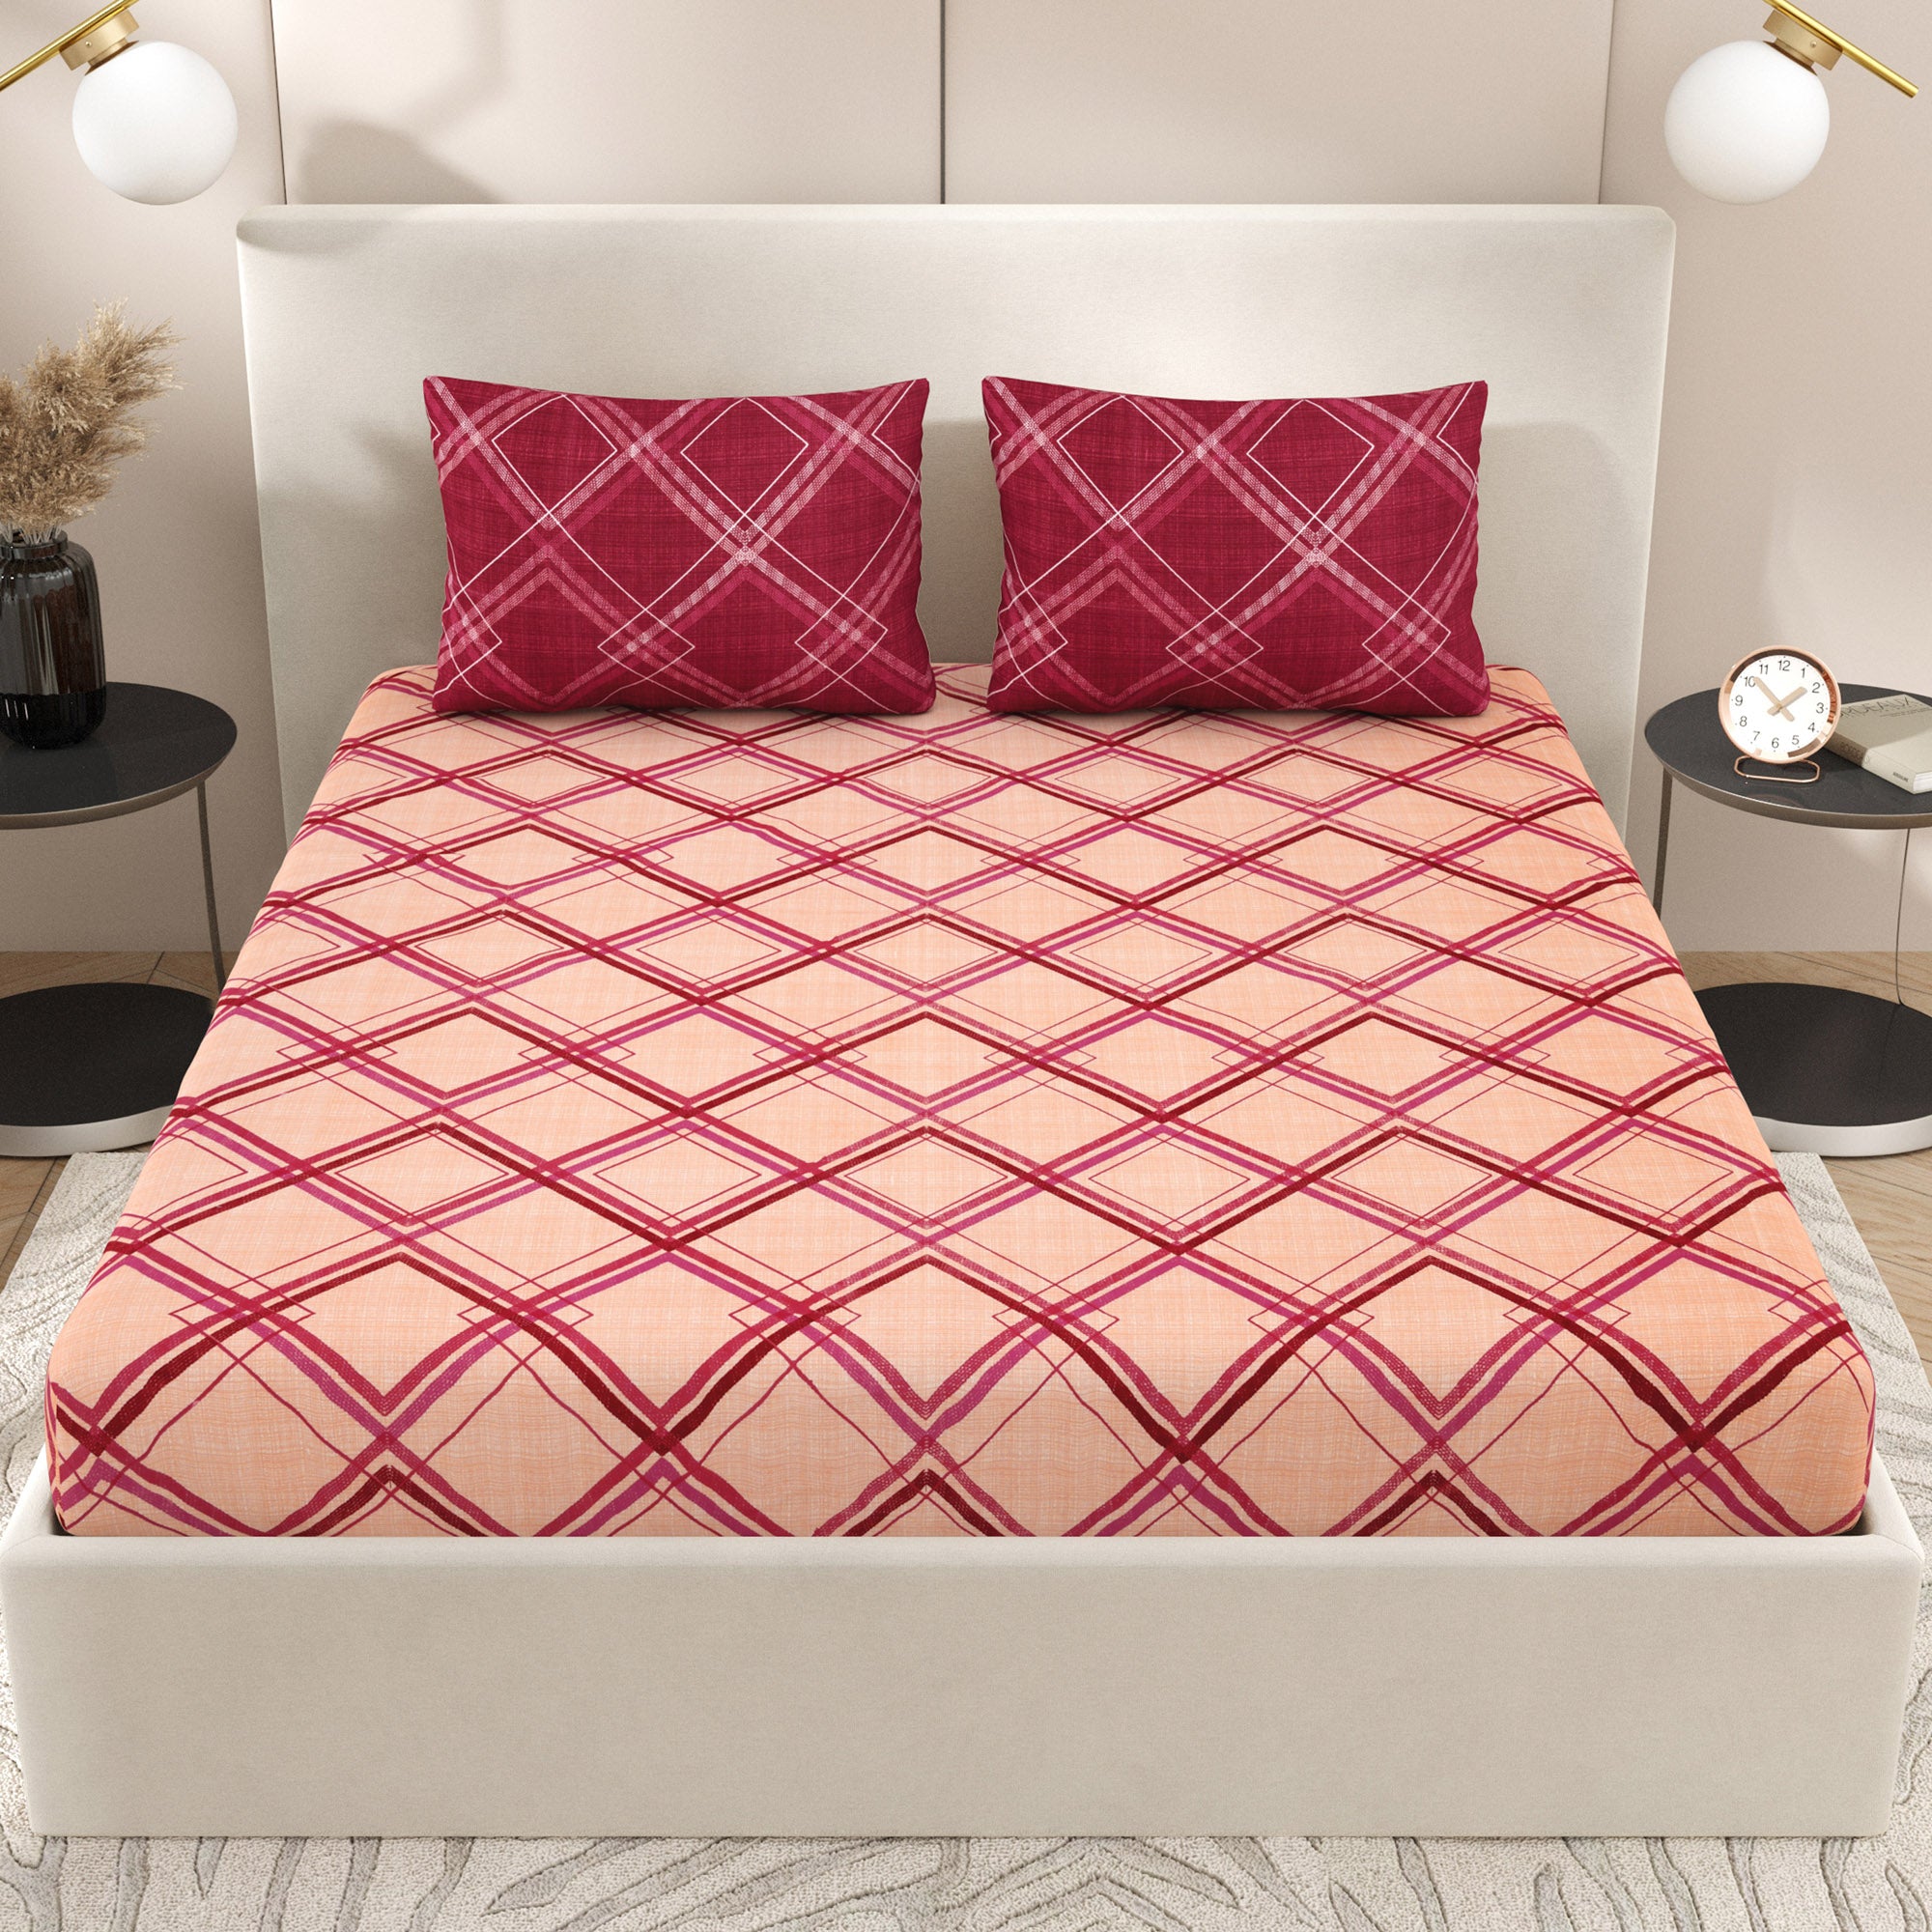 eCraftIndia 250 TC Pink, Red, Peach Geometric Square Printed Cotton Double Bedsheet With 2 Pillow Covers